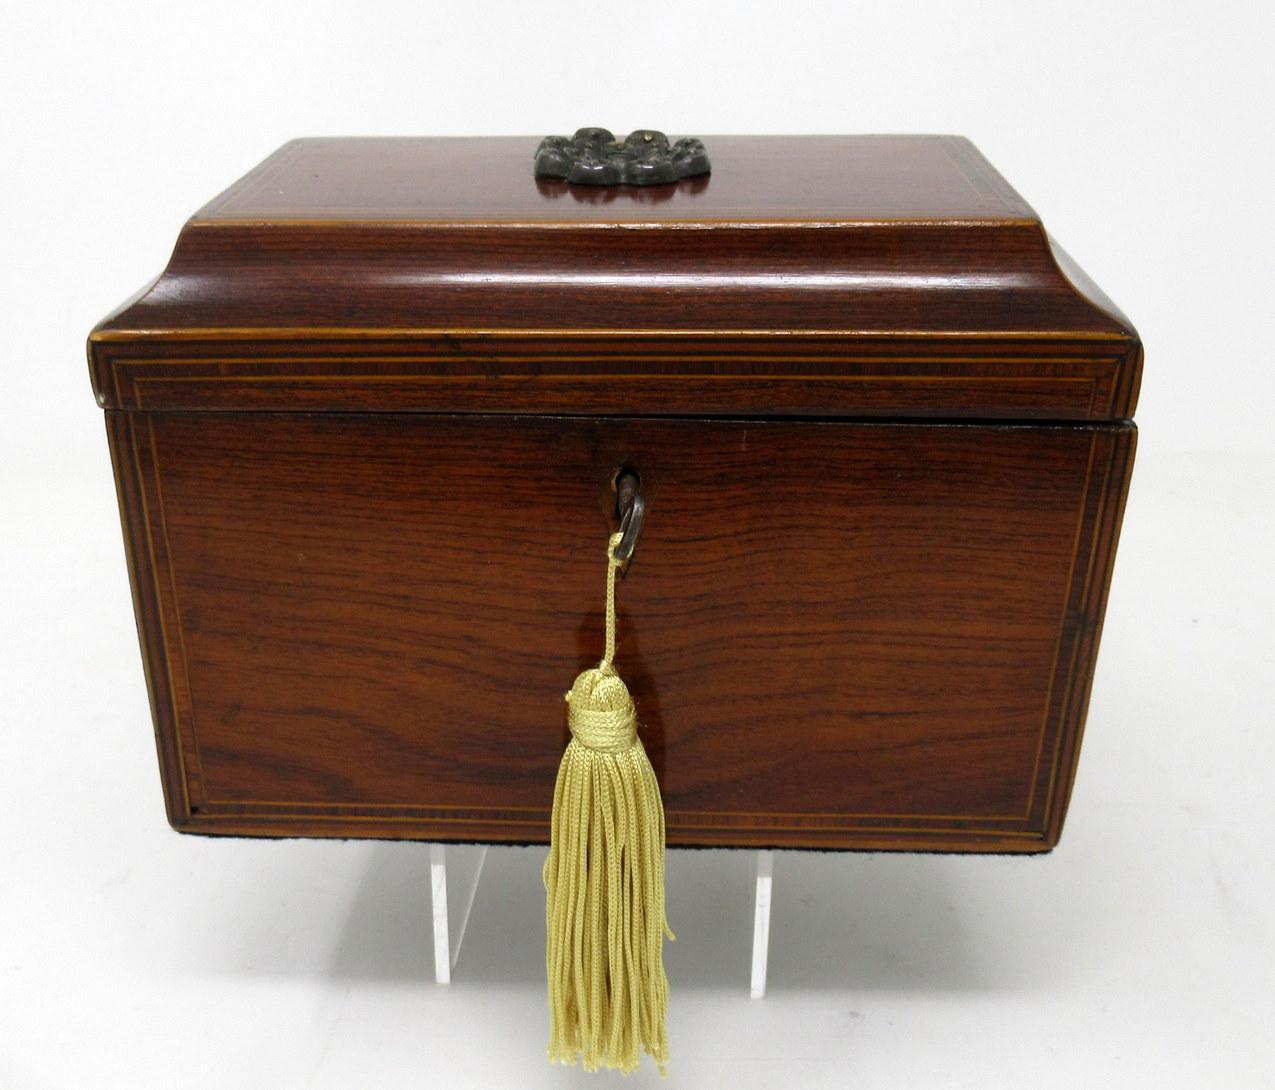 A stylish example of an English late Regency period well grained flame mahogany double interior section tea caddy of rectangular outline and compact size, the hinged Pagoda style lid with inlaid edging of boxwood stringing. 

First quarter of the